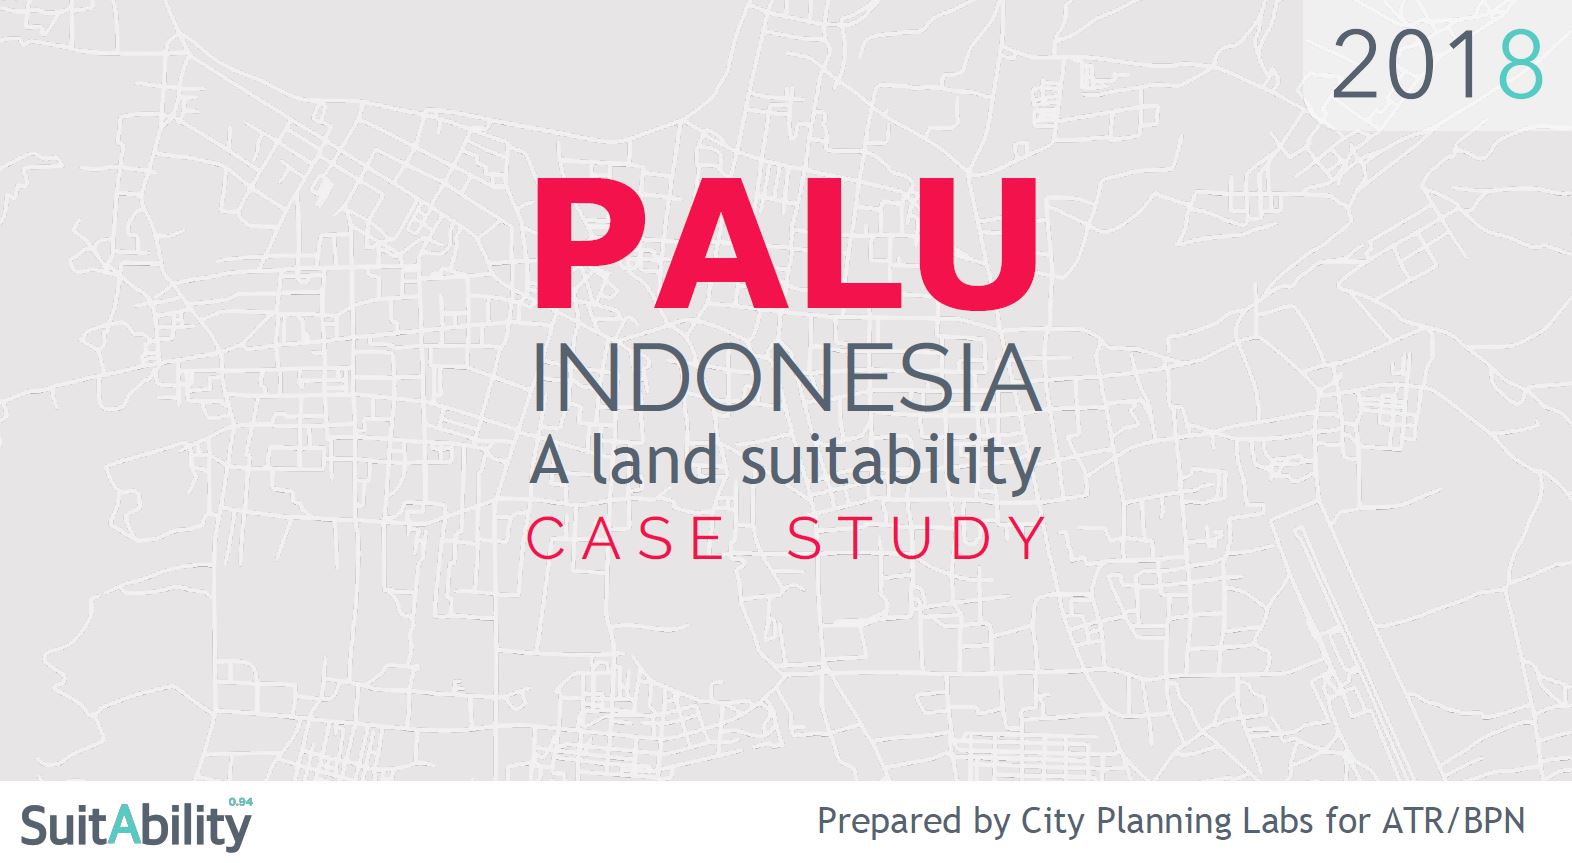 Case Study - Land Suitability in Palu Indonesia